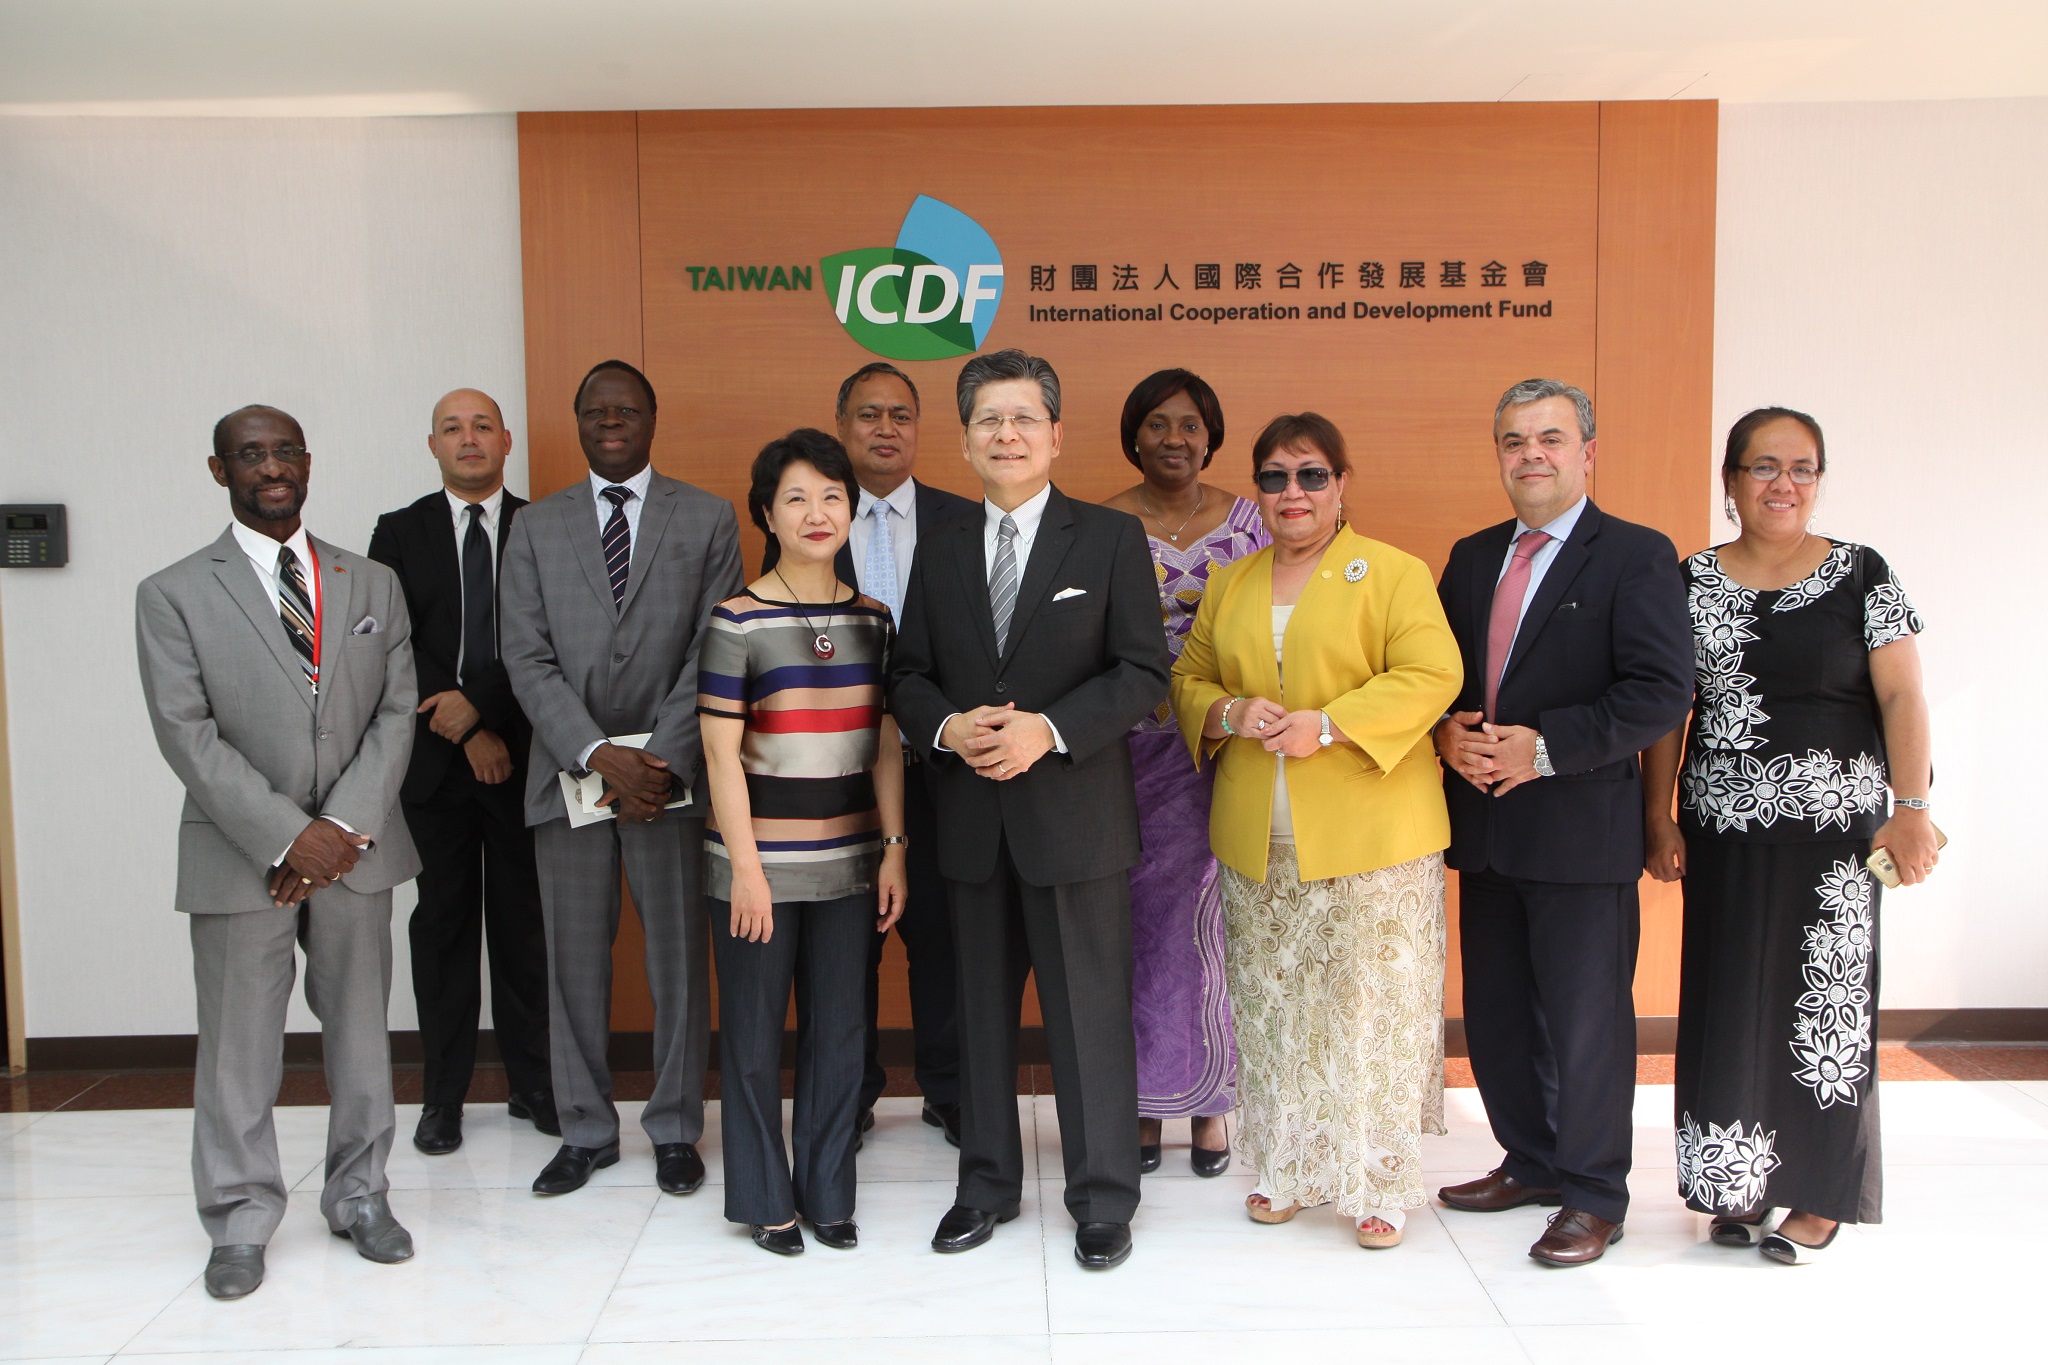 Permanent Representatives to the United Nations Visit the TaiwanICDF